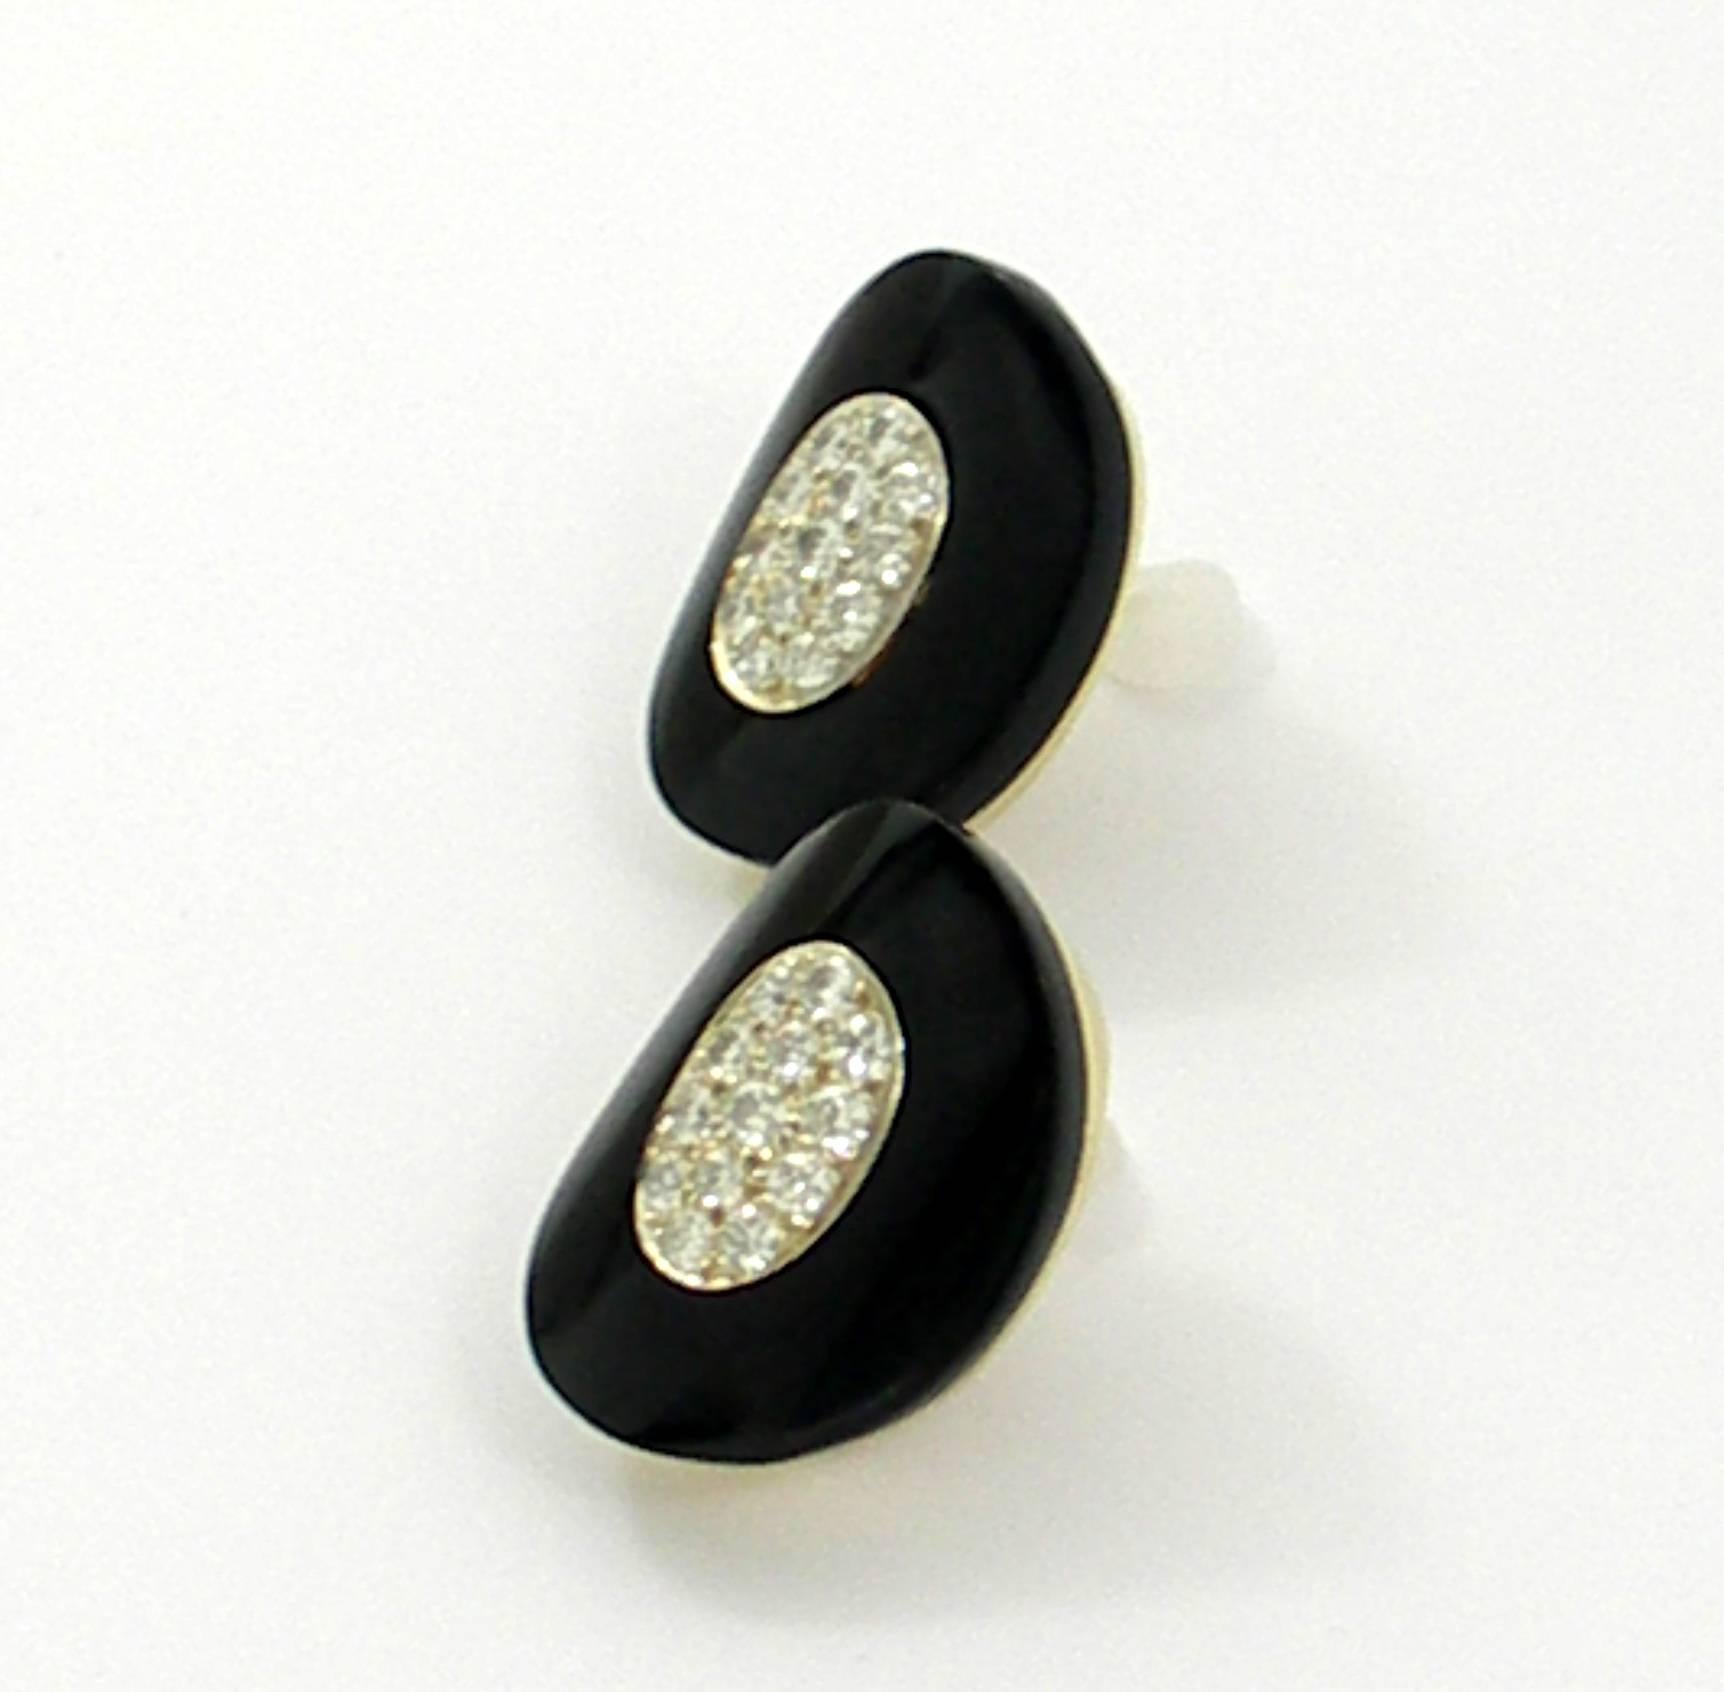 Van Cleef & Arpels Elongated Oval Earrings with Diamonds and Onyx 1